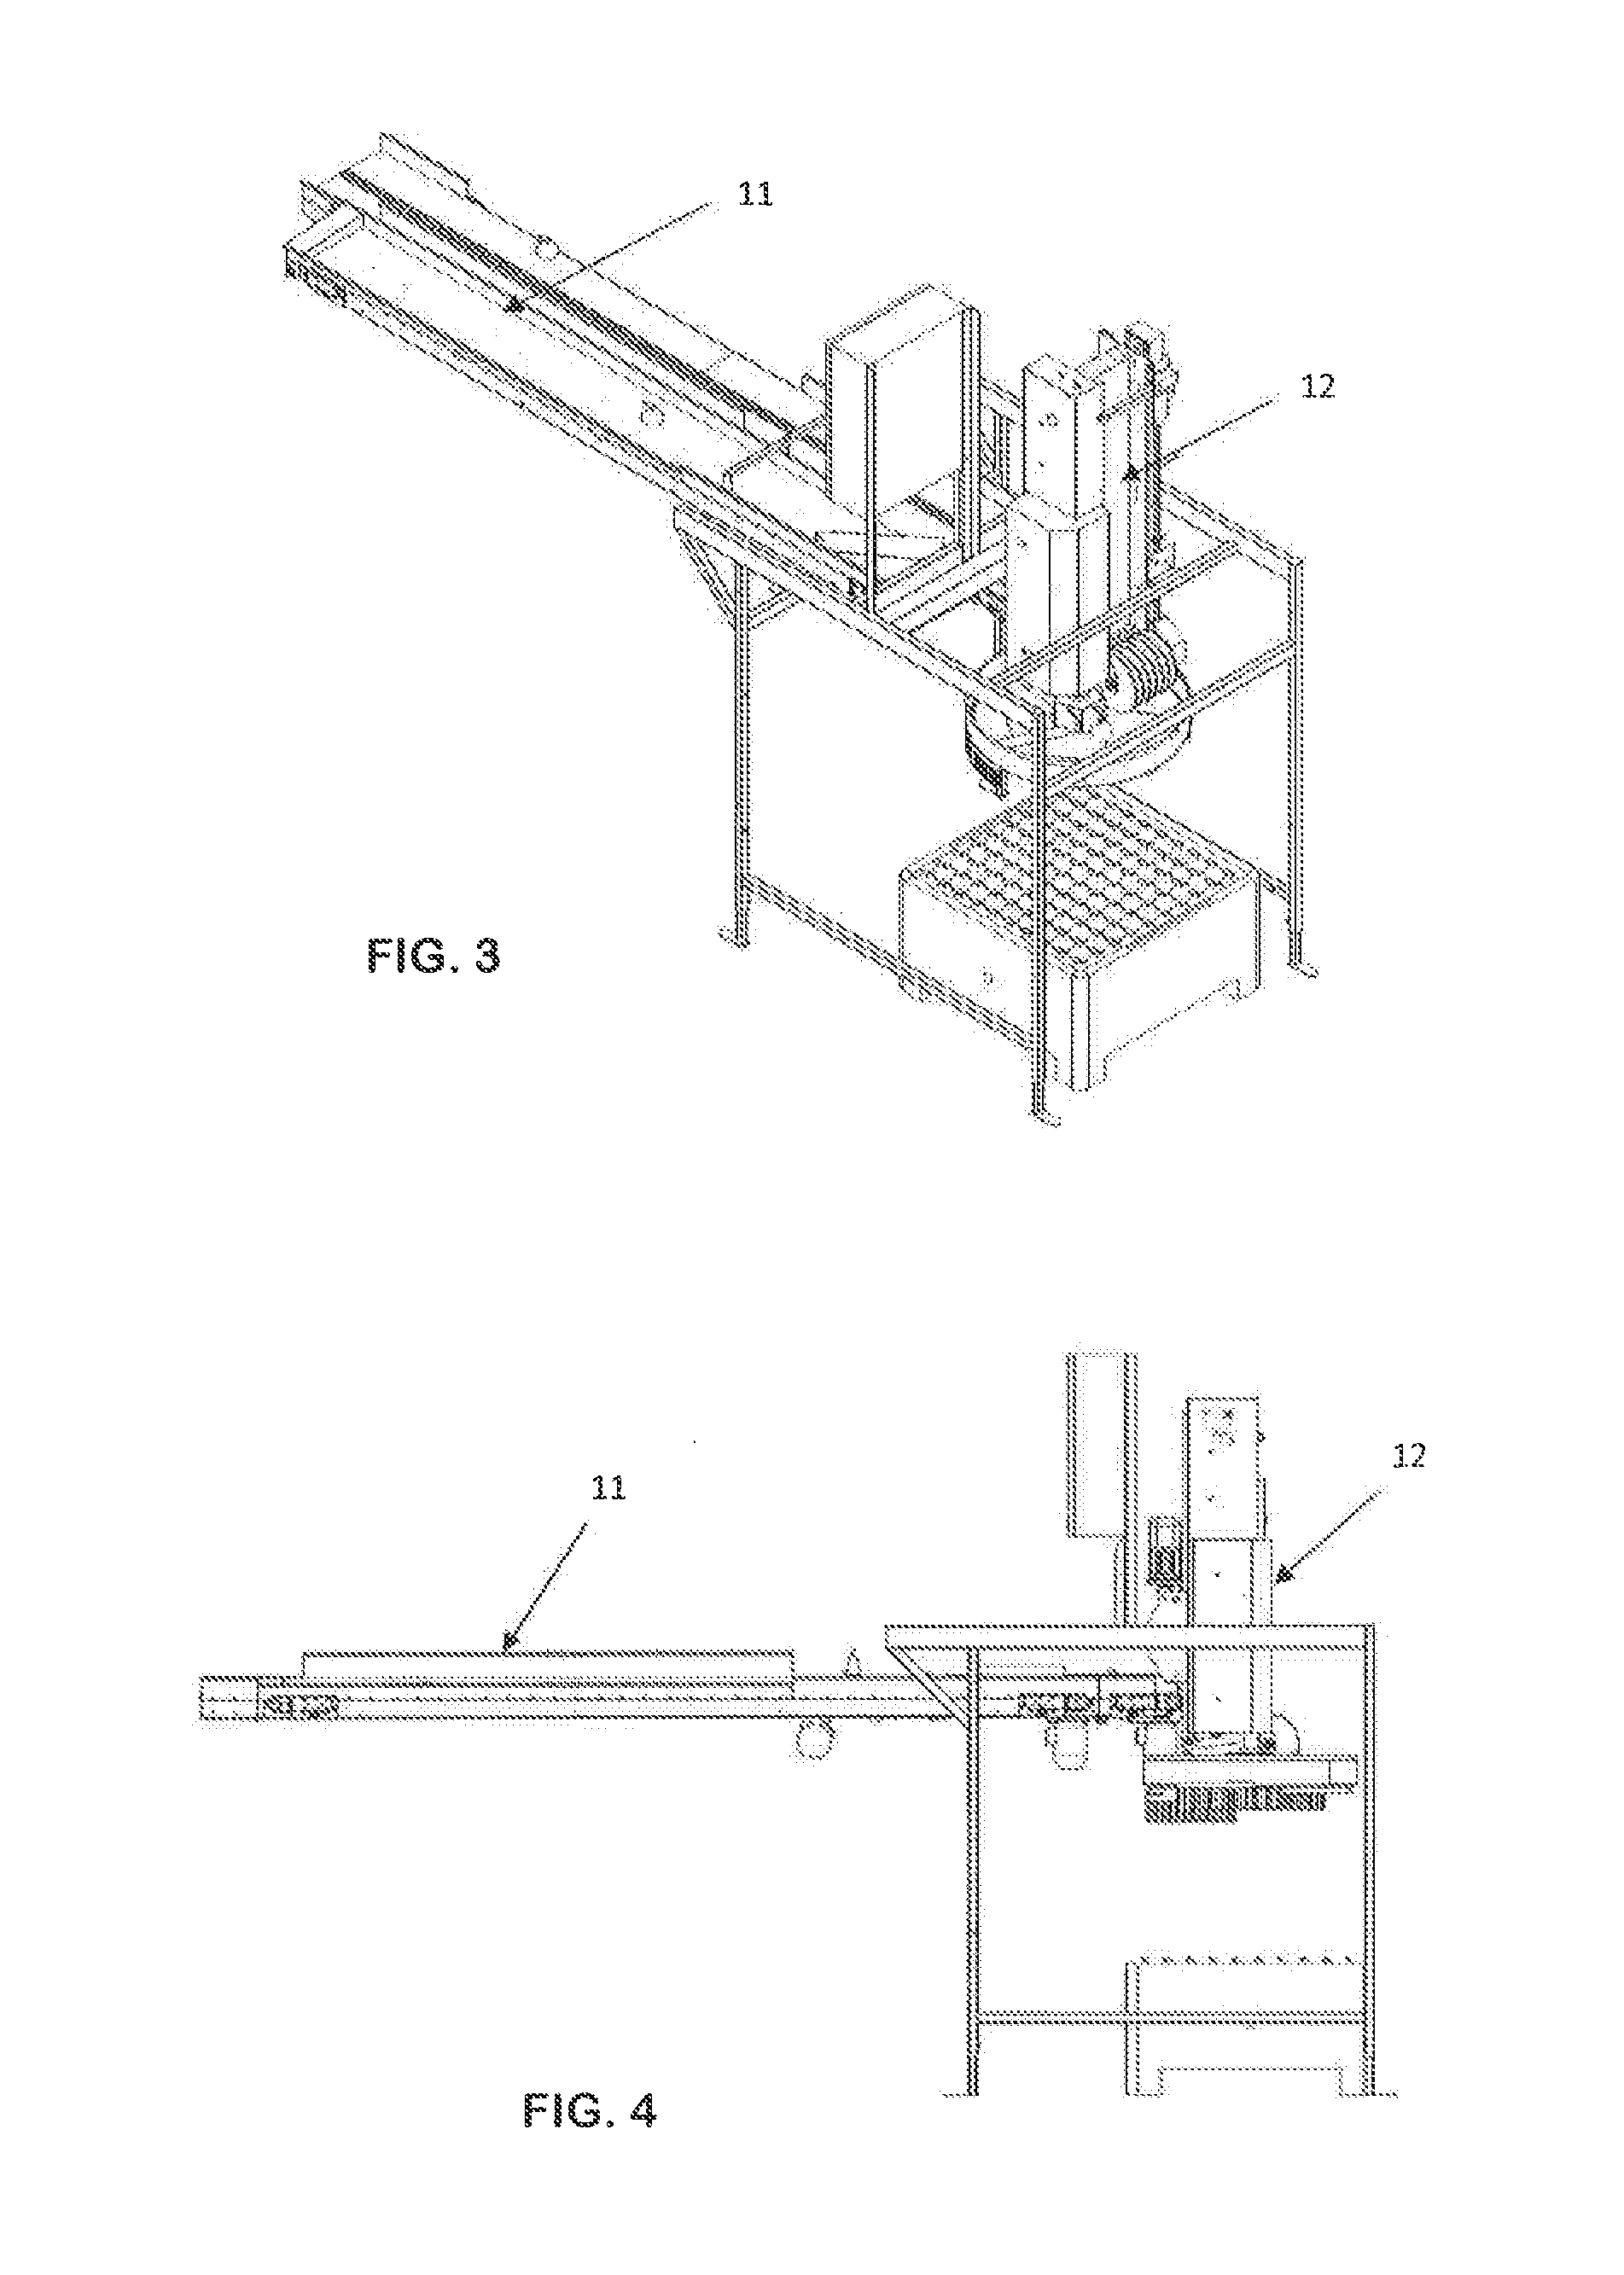 System for dry-filling bins with vegetable products